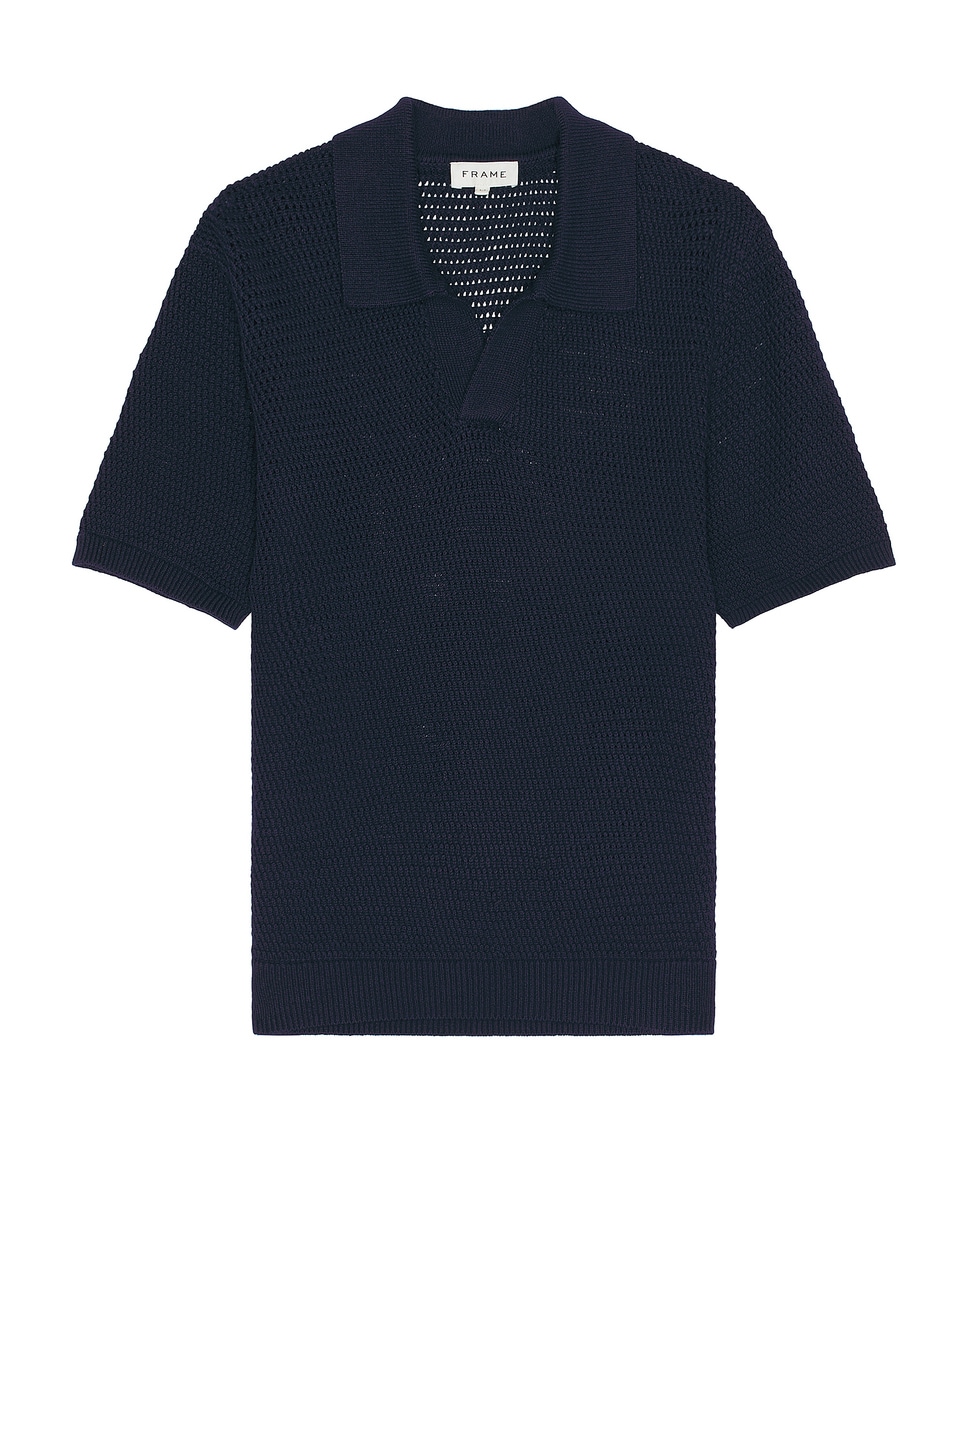 Image 1 of FRAME Short Sleeve Sweater Polo in Navy